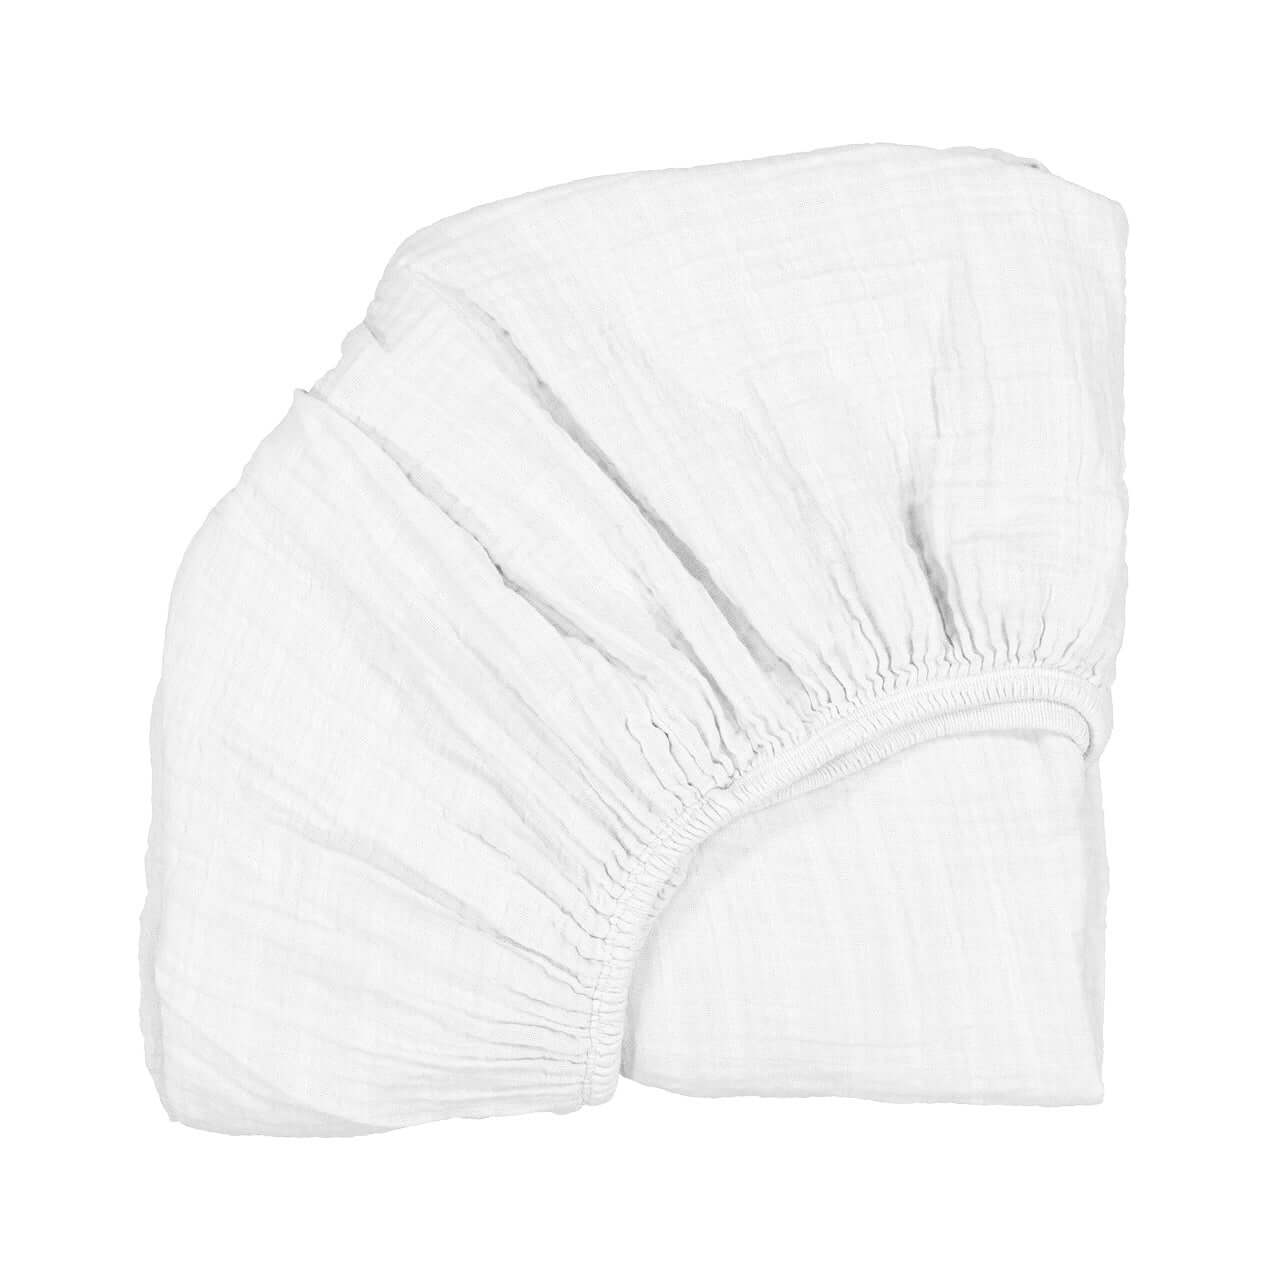 Fitted Sheet for KUKO Moses Basket and KUMI Crib-Charlie Crane-Stroll Zone